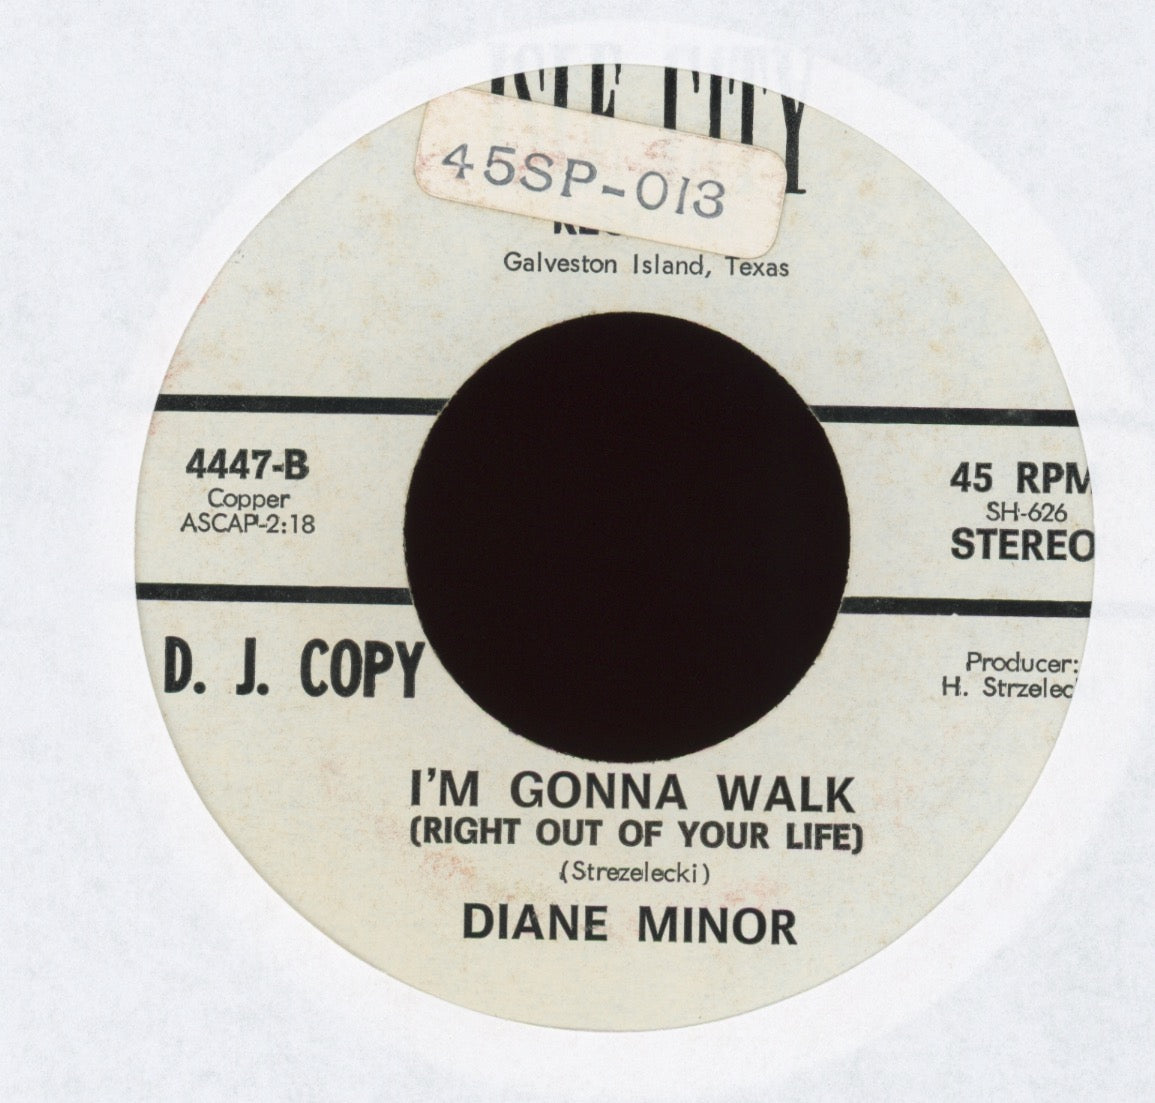 Diane Minor - I'm Gonna Walk (Right Out Of Your Life) on Isle City Promo